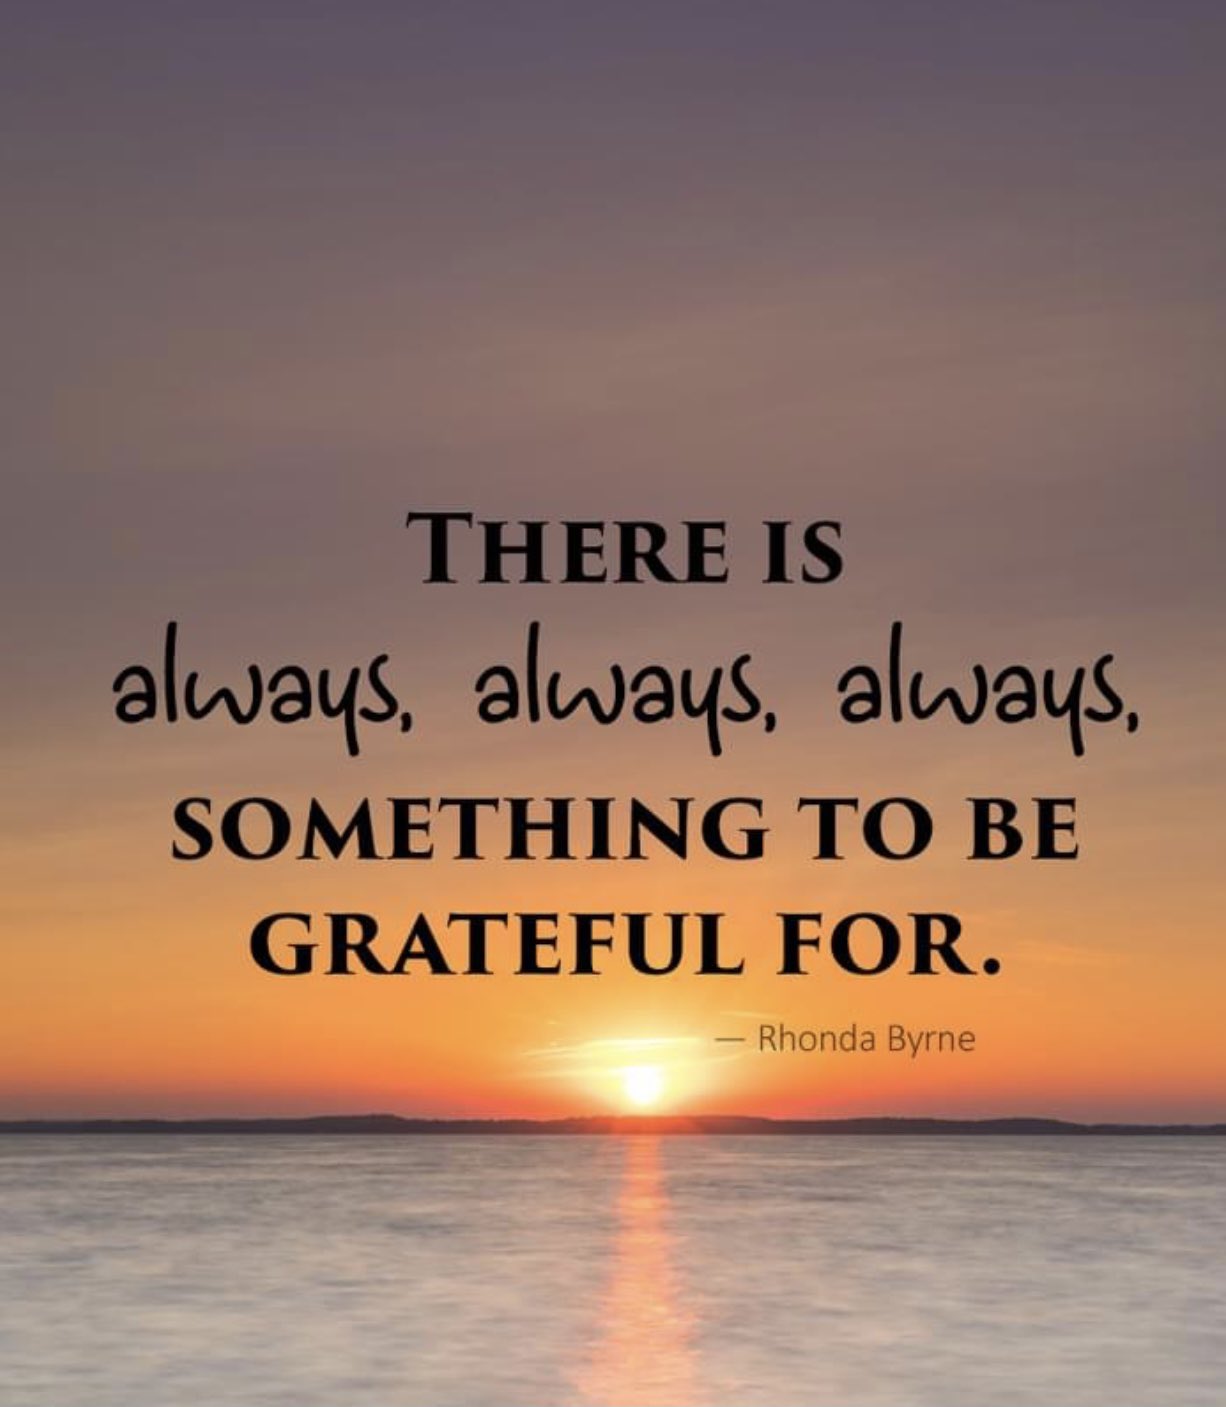 Roma Downey on X: There is always always always something to be grateful  for ❤️ #Grateful #gratitude #Thankful  / X